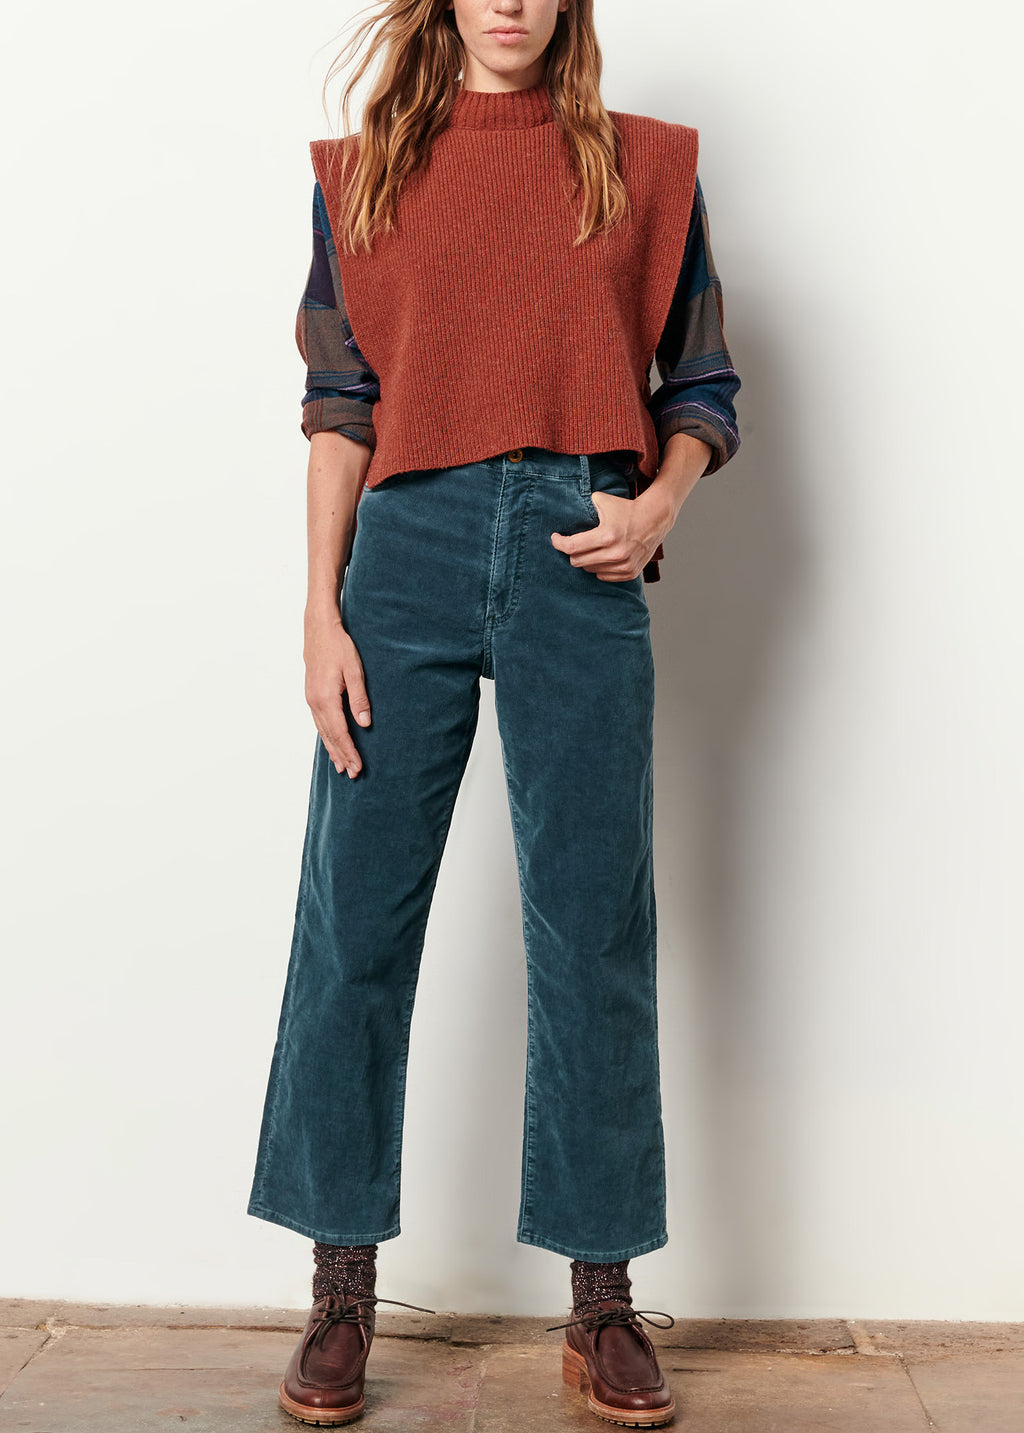 FUMO Moss Velvet and Pants Cruise in – Mabel